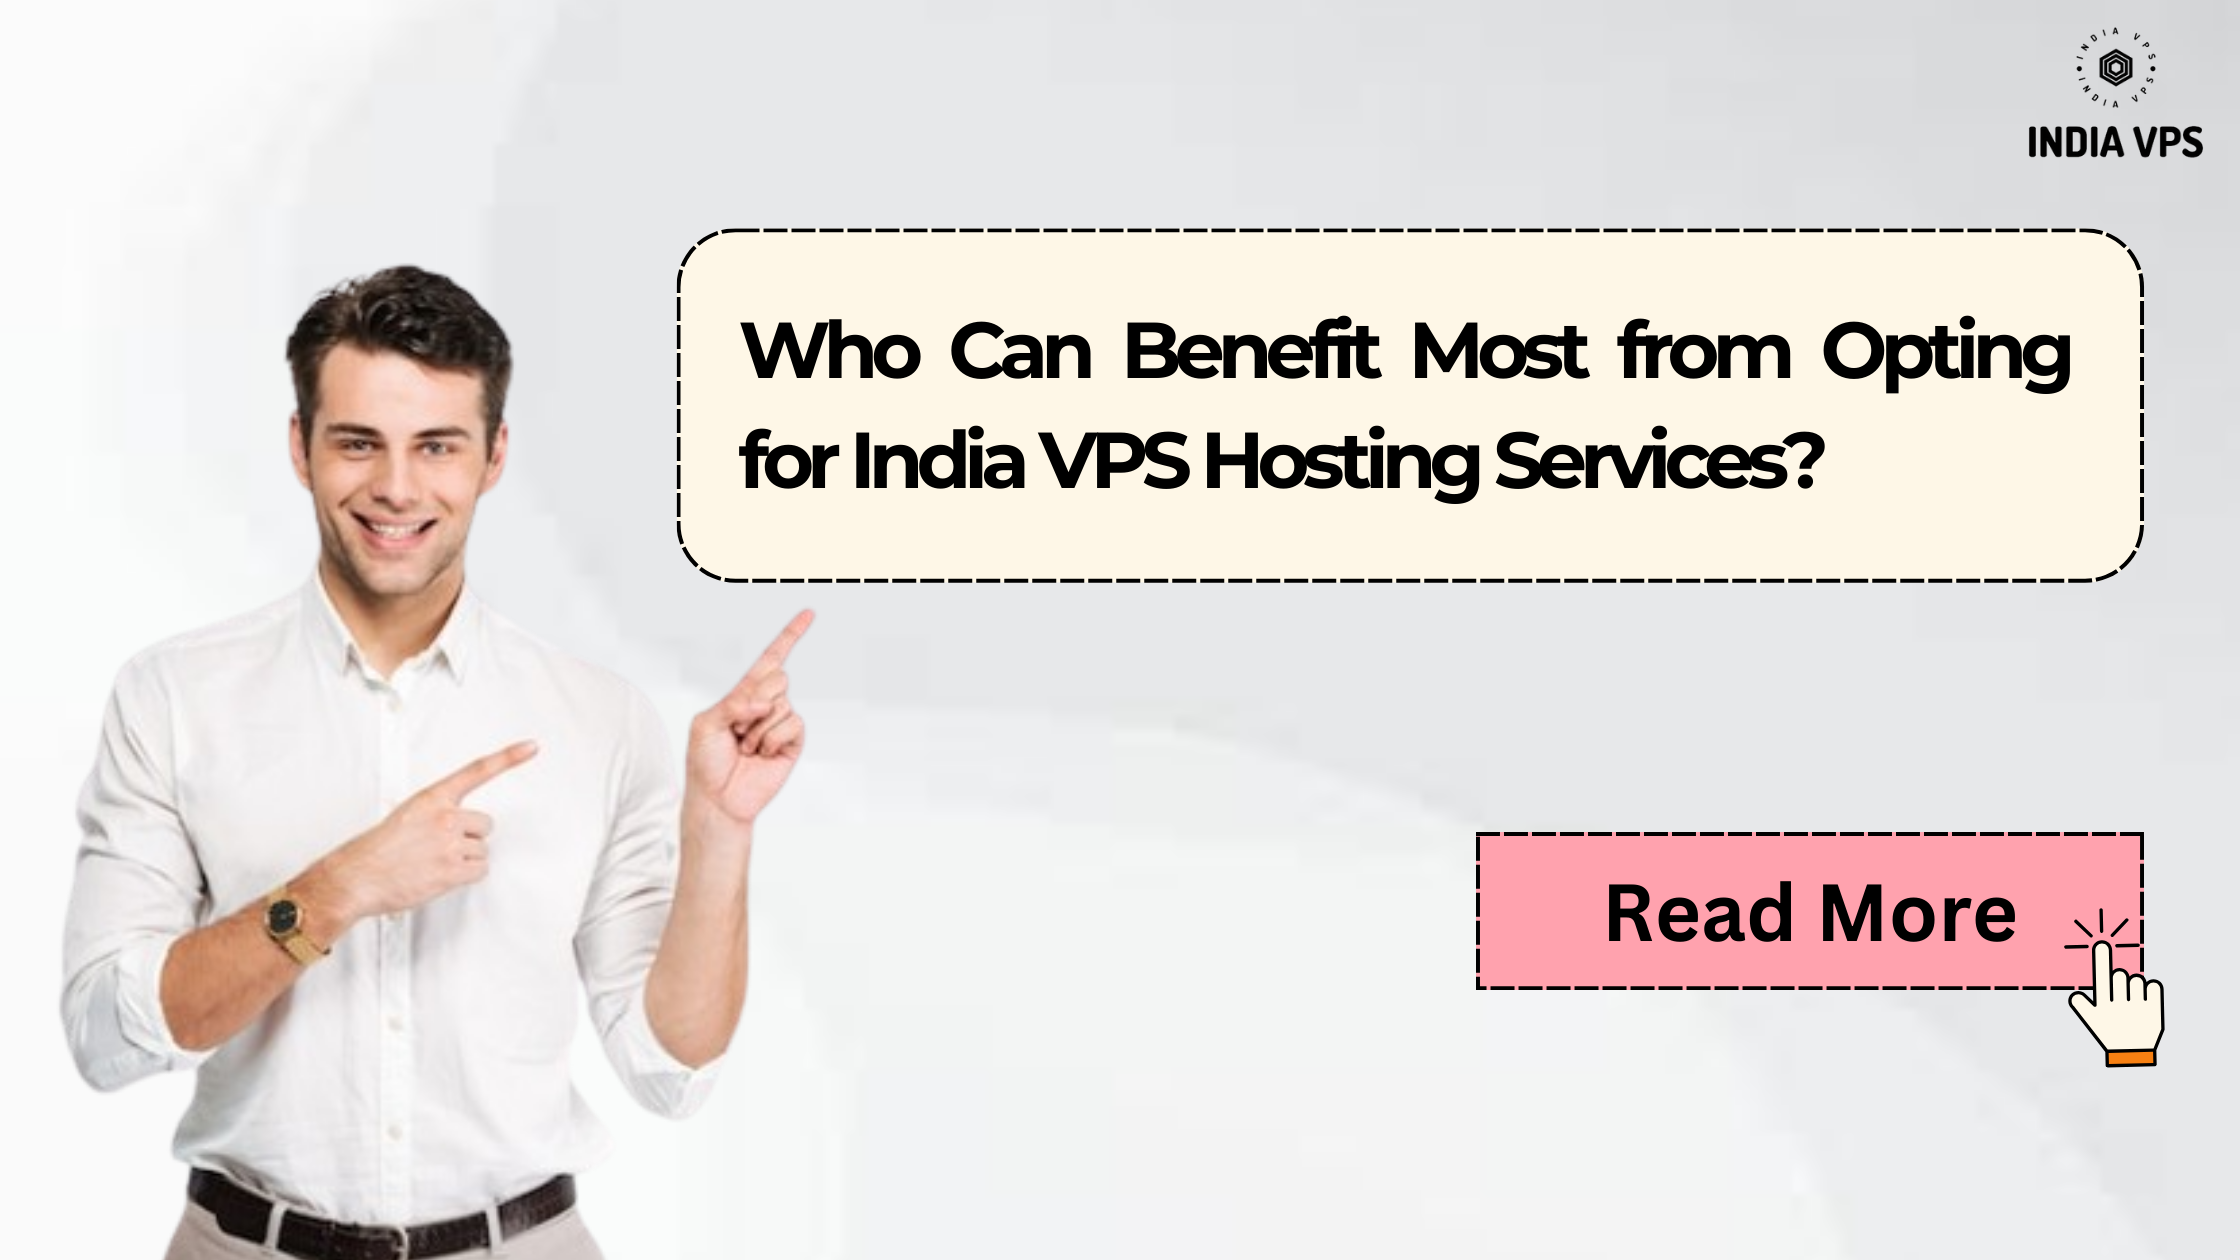 Who Can Benefit Most from Opting for India VPS Hosting Services